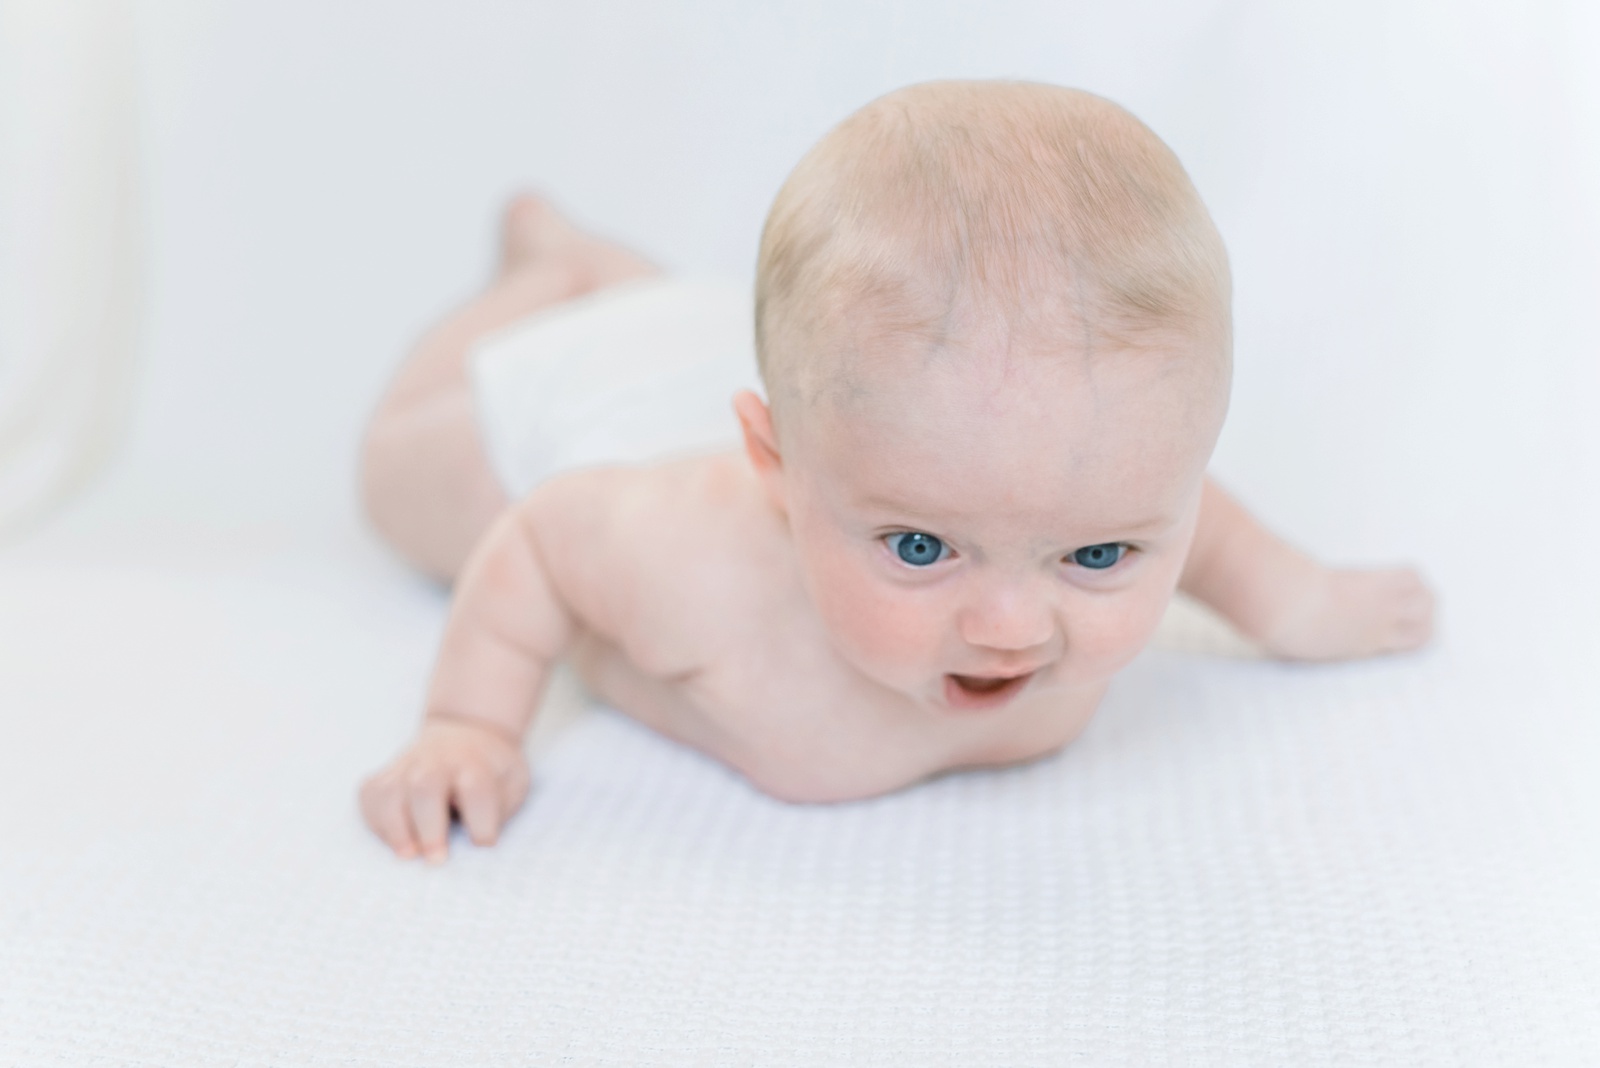 sweet-baby-james-allen-4-and-5-months-old-photo_7614.jpg